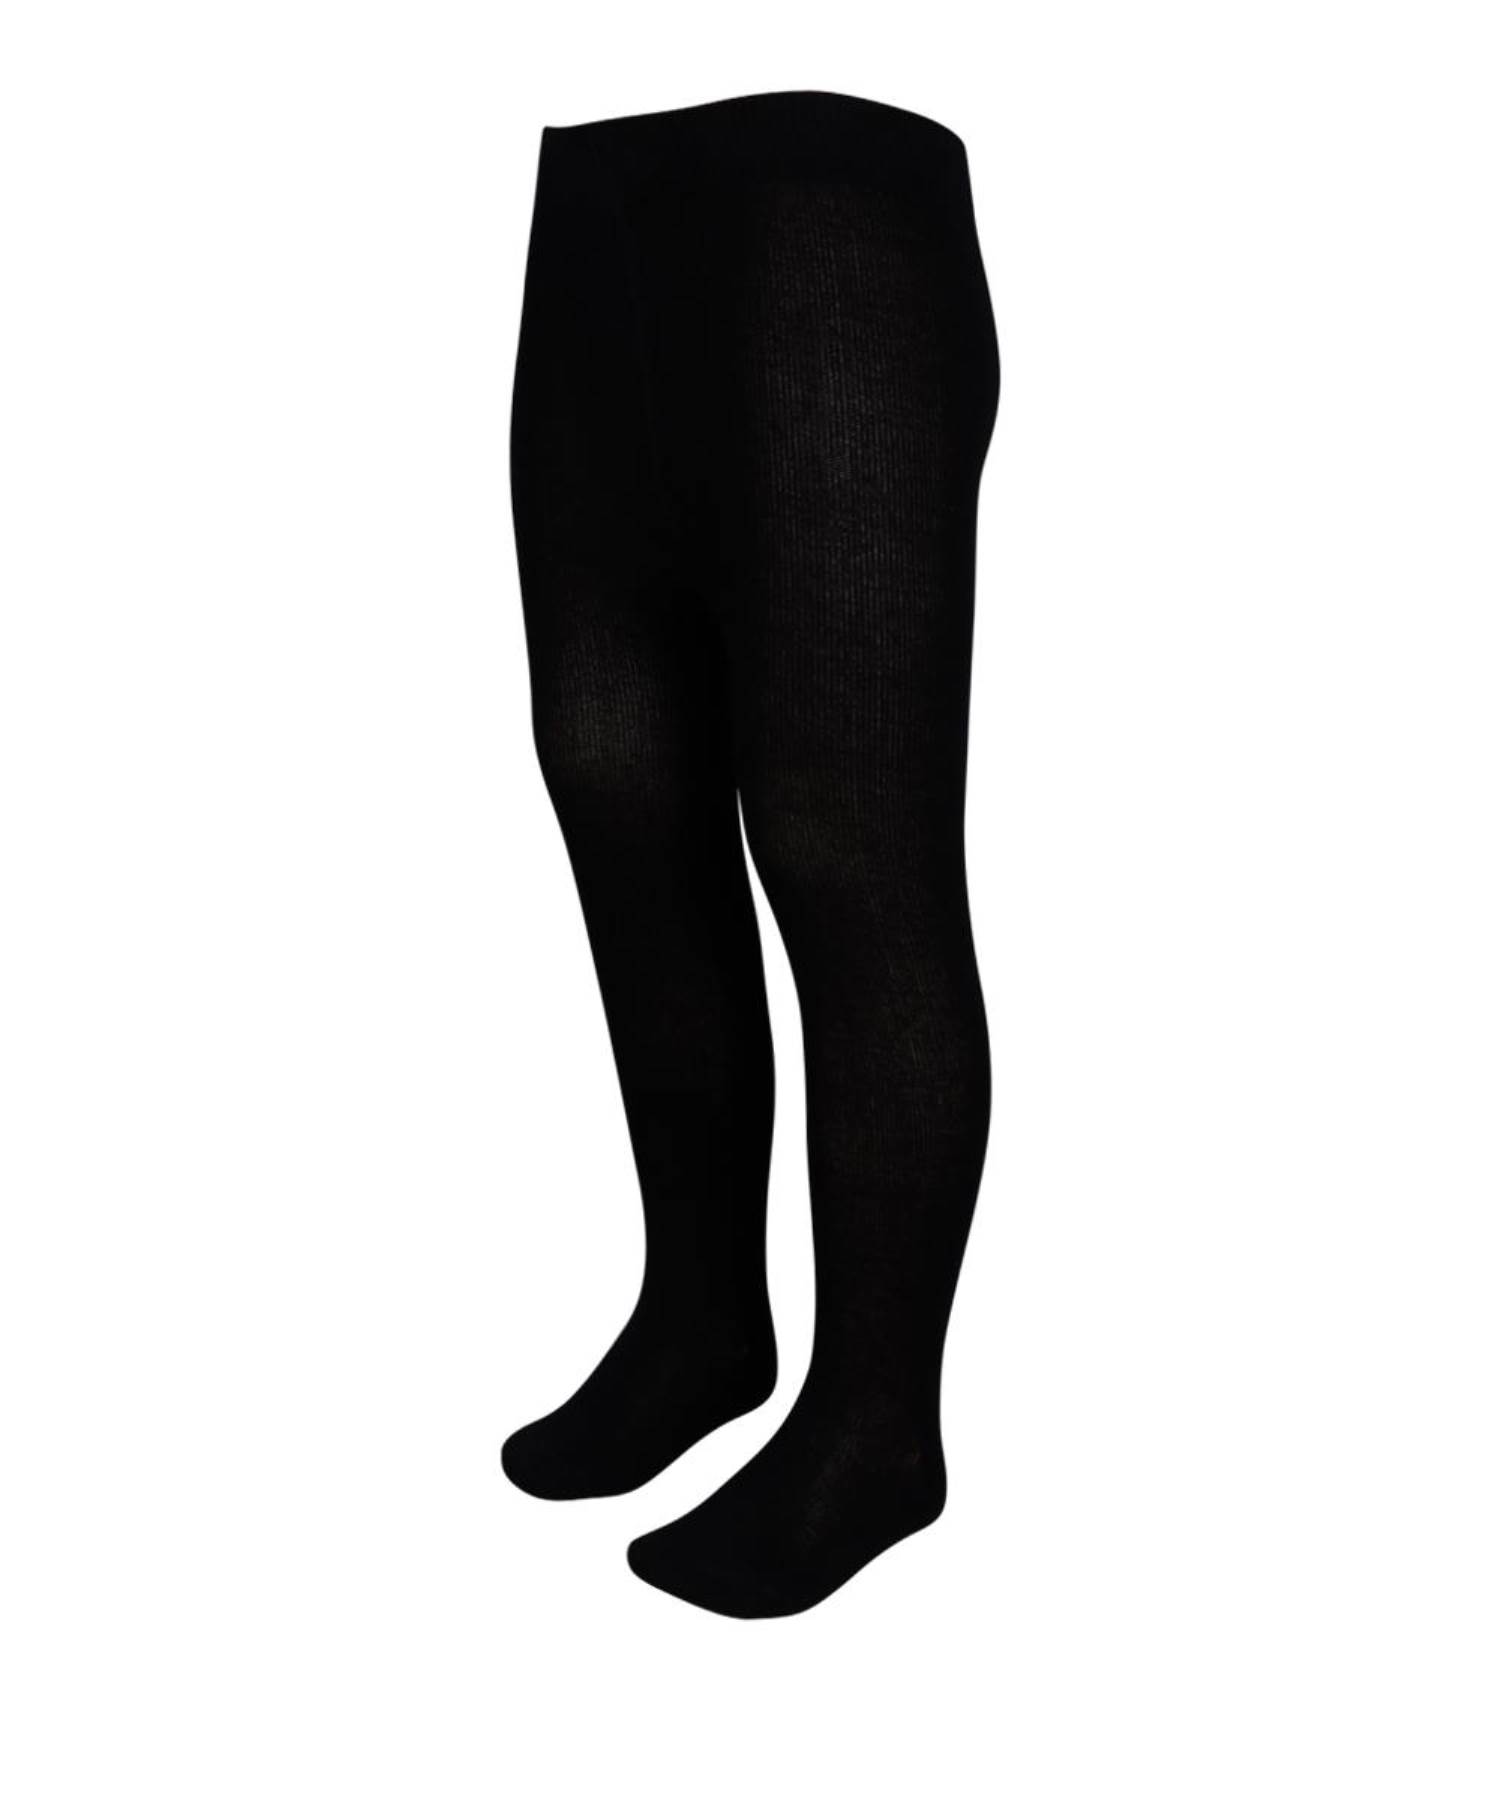 MUSTANG KID'S ORCHID PLAIN BLACK TIGHTS / STOCKING :: SMILE BABY